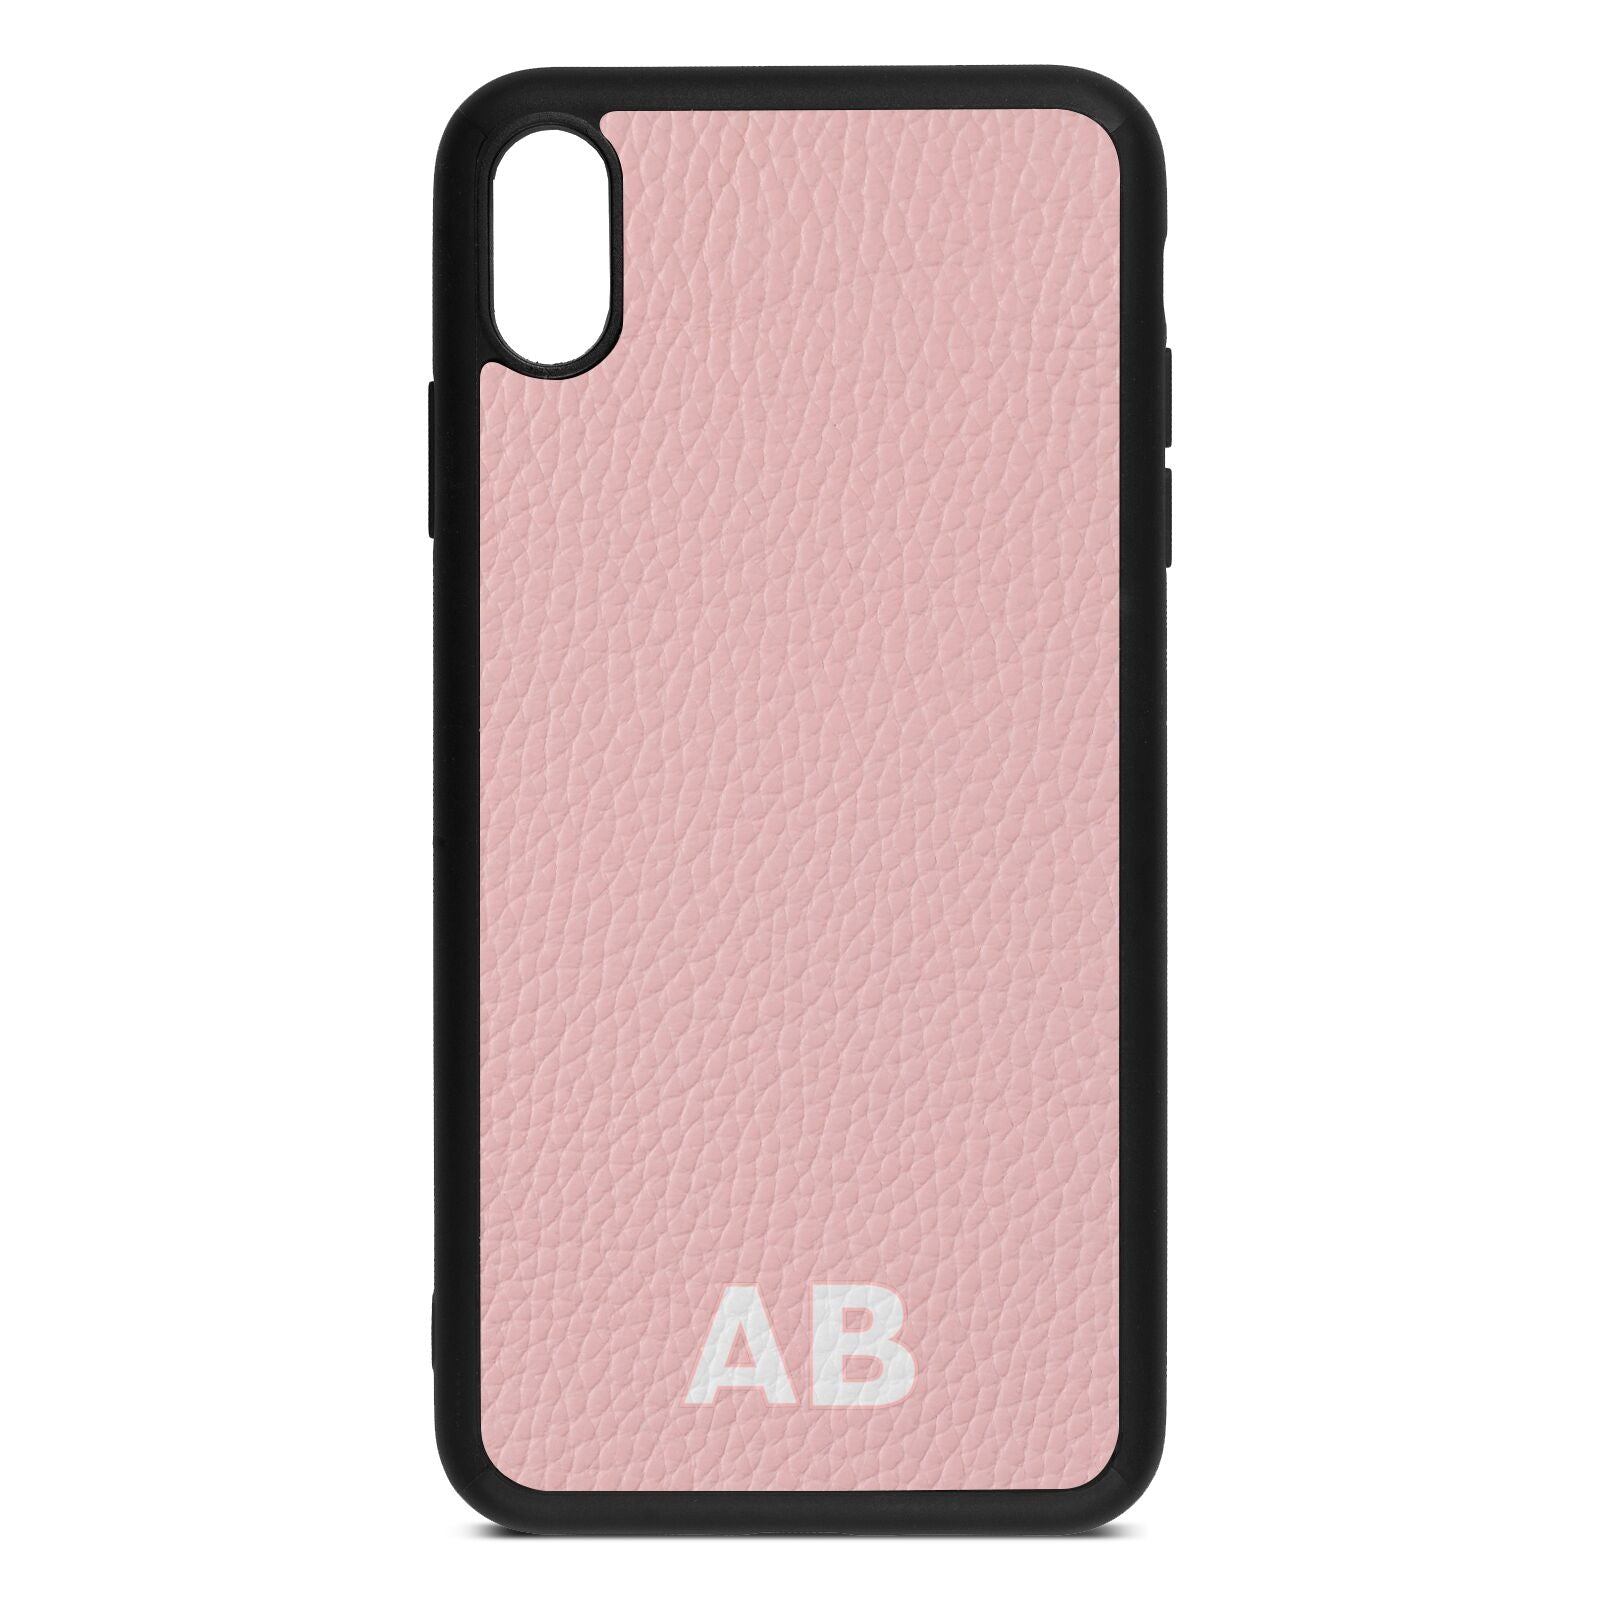 Sans Serif Initials Pink Pebble Leather iPhone Xs Max Case